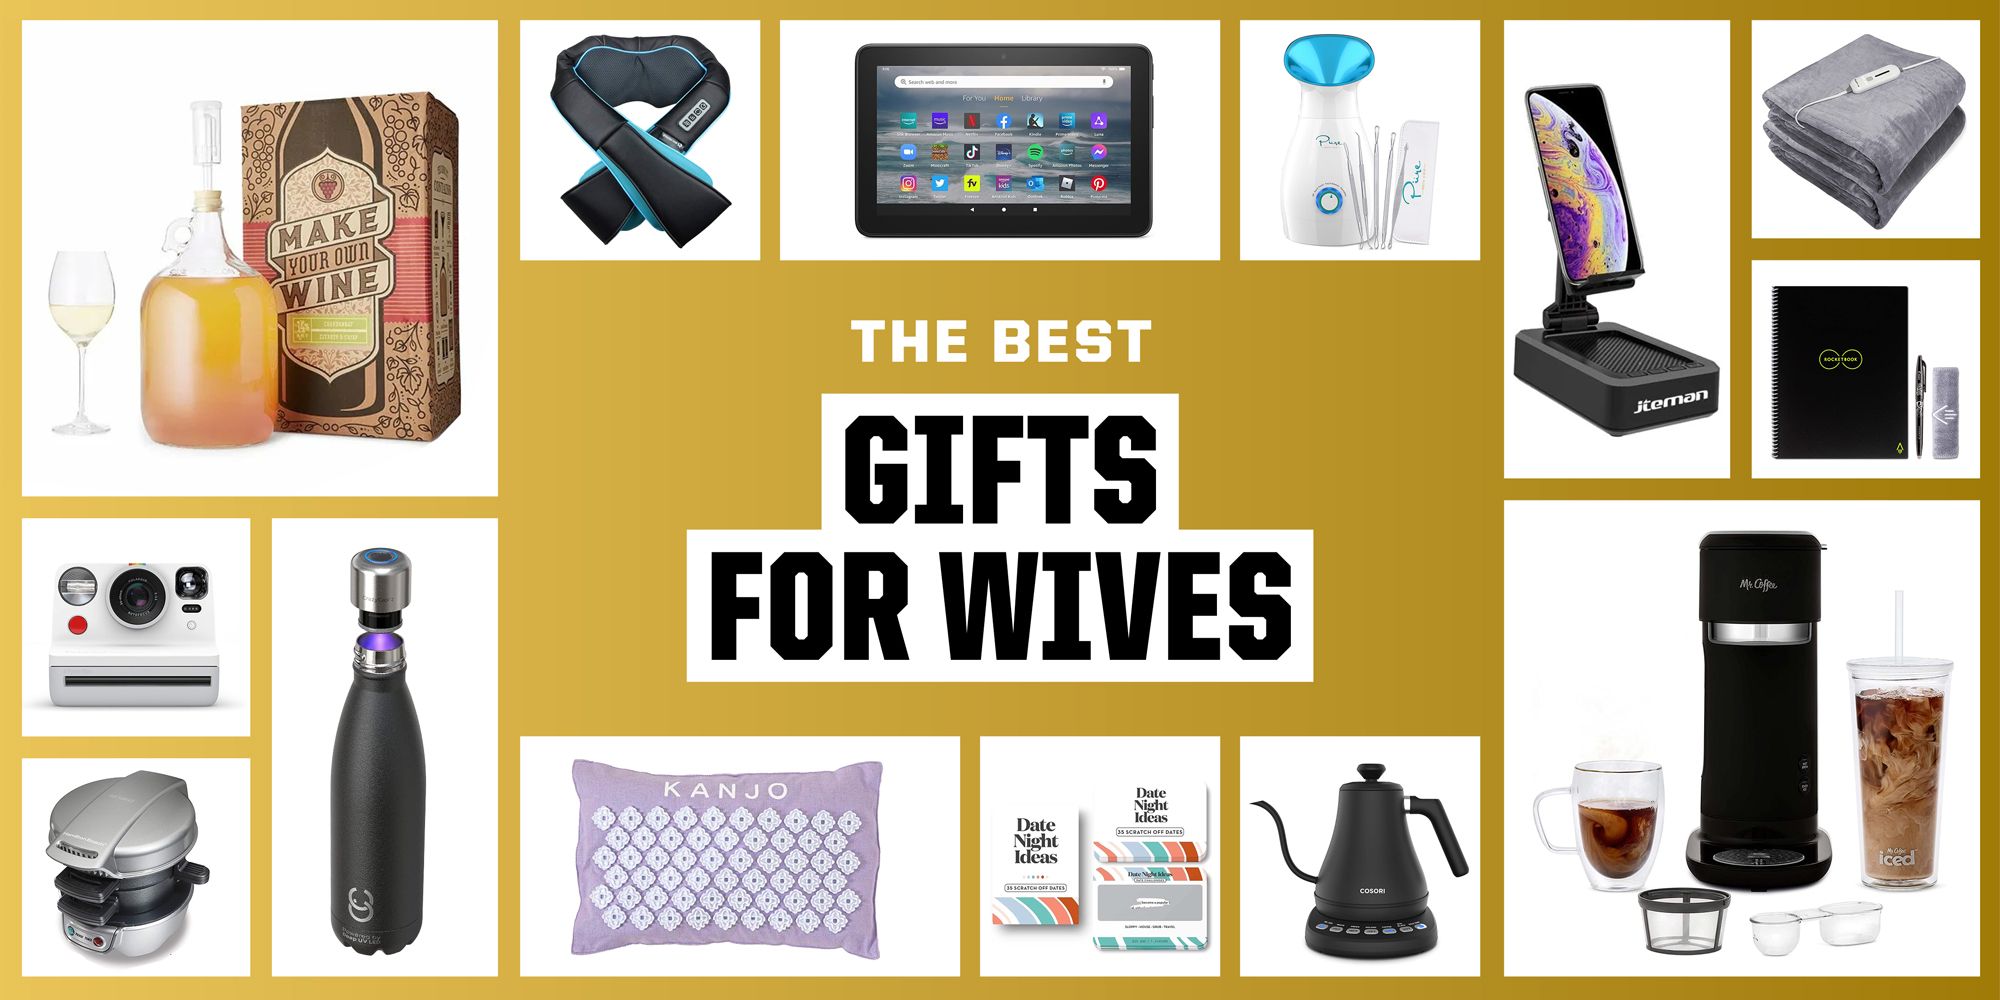 20 Best Gifts for Wives Under $100 in 2022 — Christmas Gifts for Wives